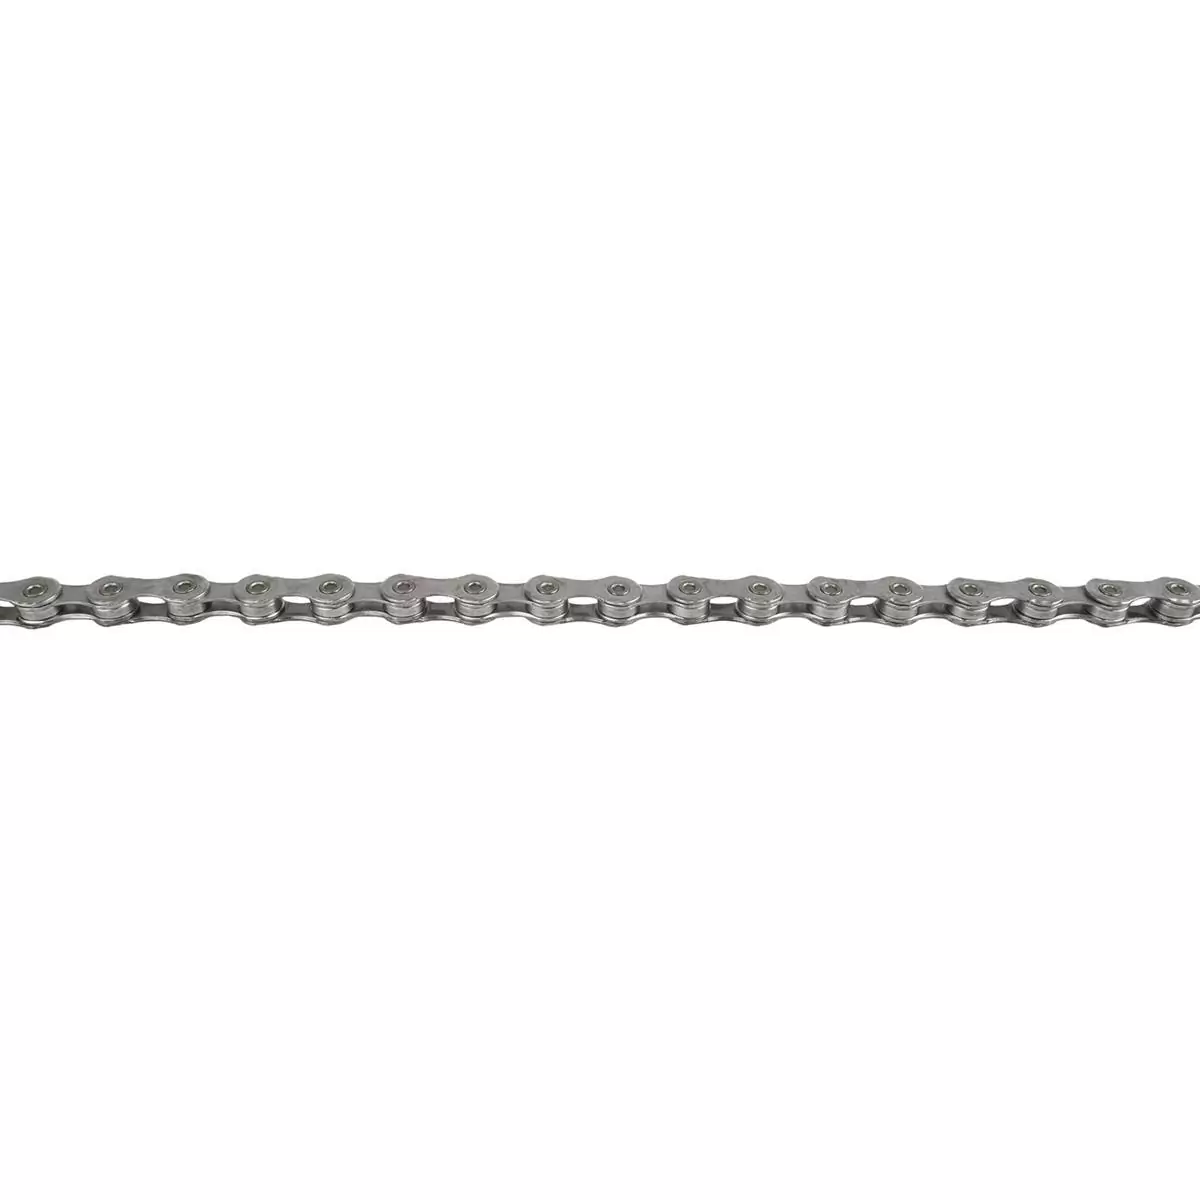 Chain Elevenspeed Anti-Rust 116 links 11s silver - image